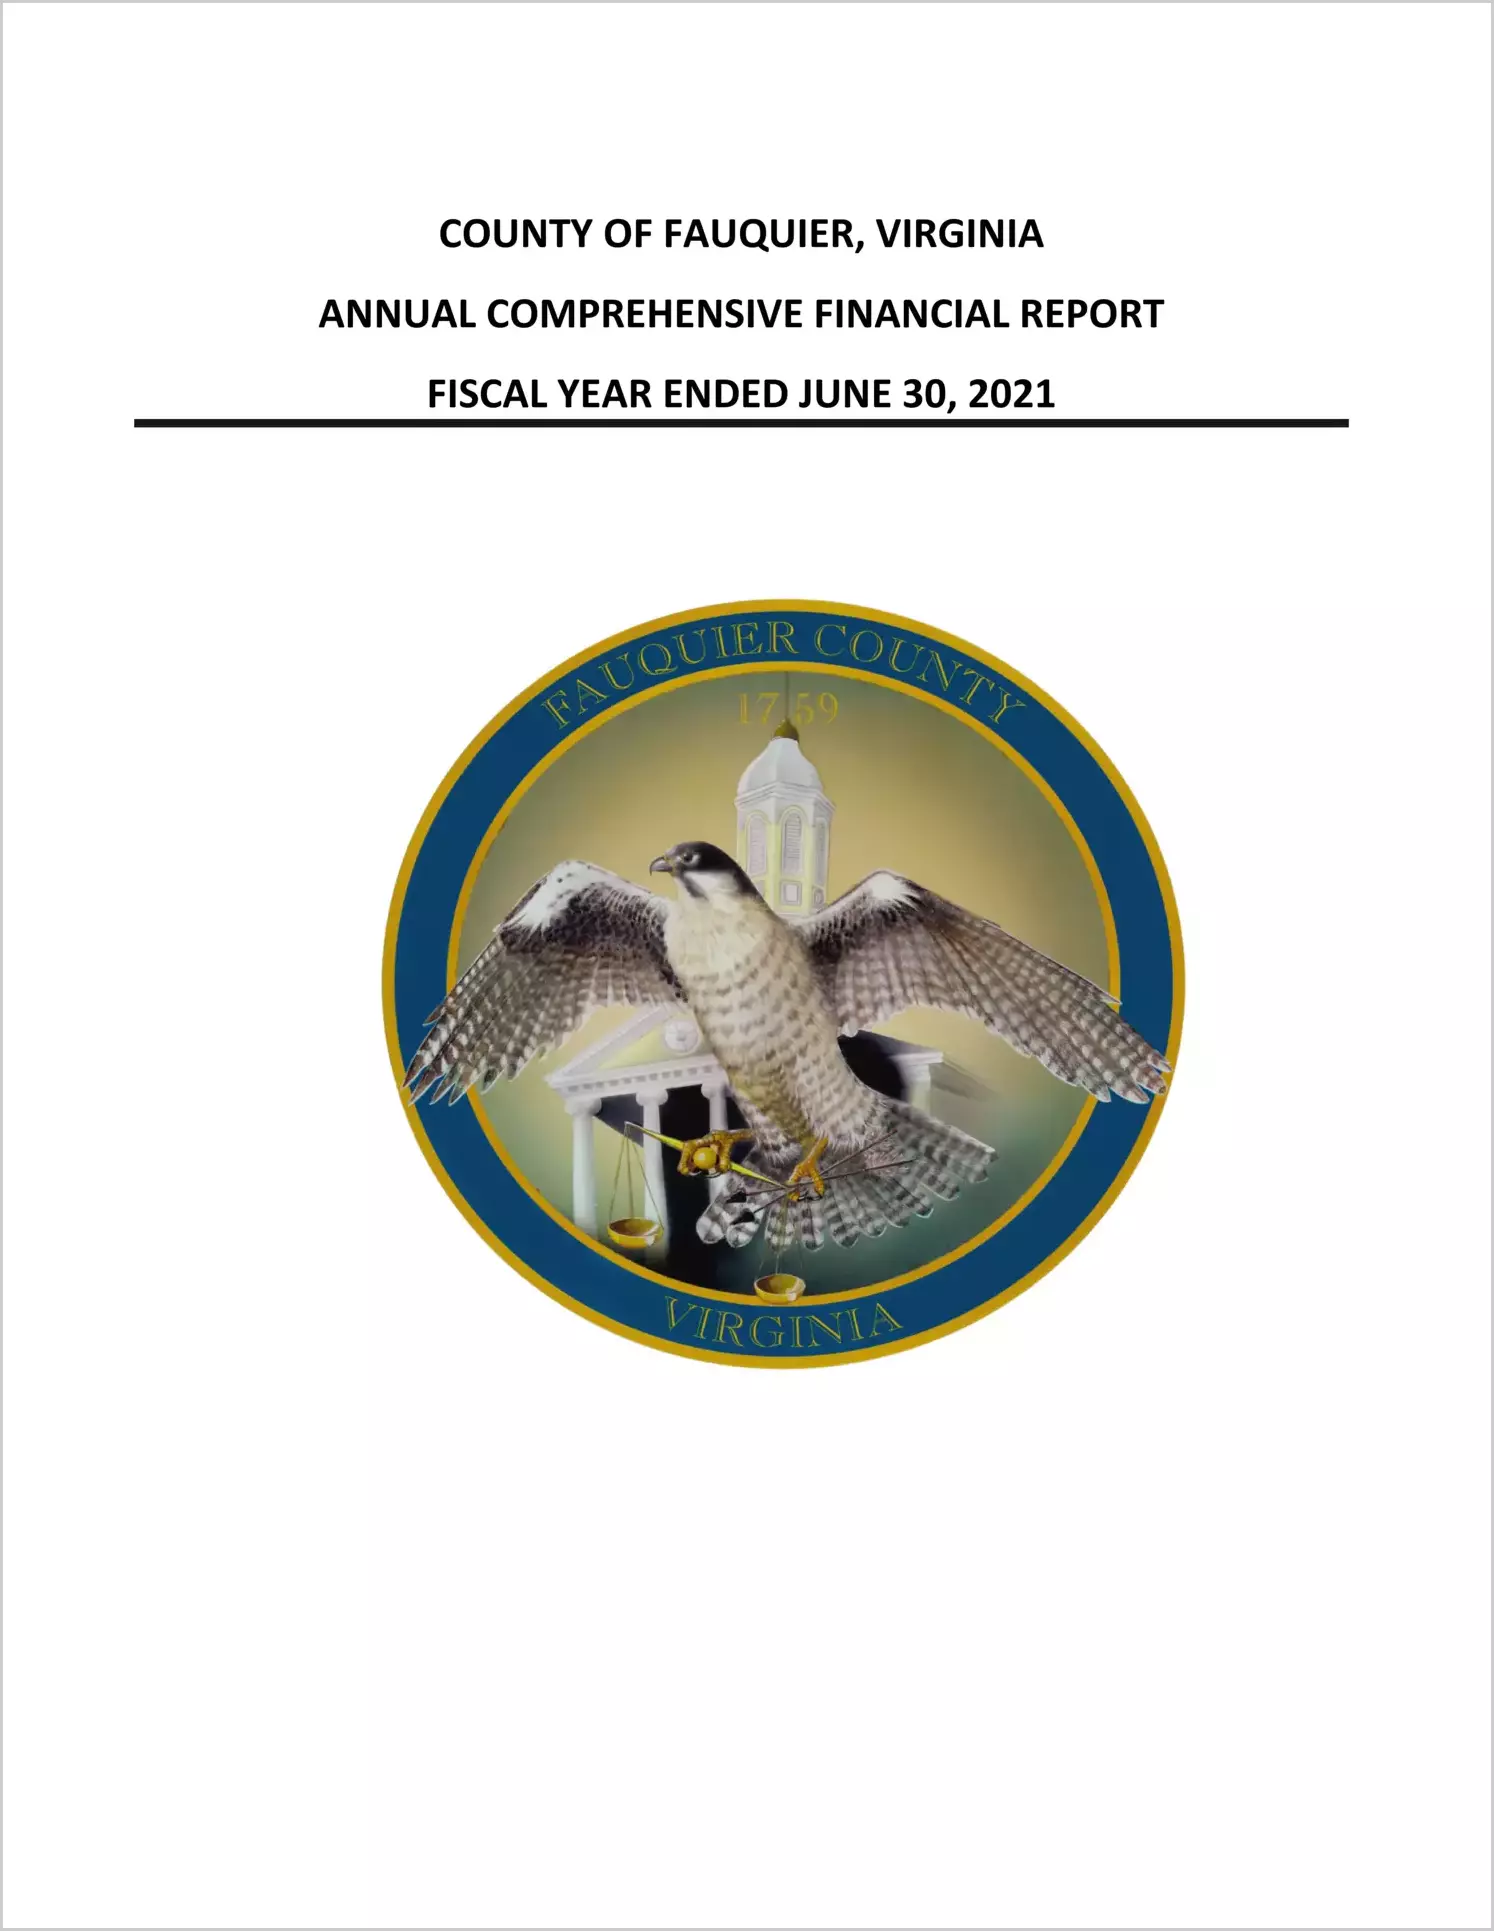 2021 Annual Financial Report for County of Fauquier